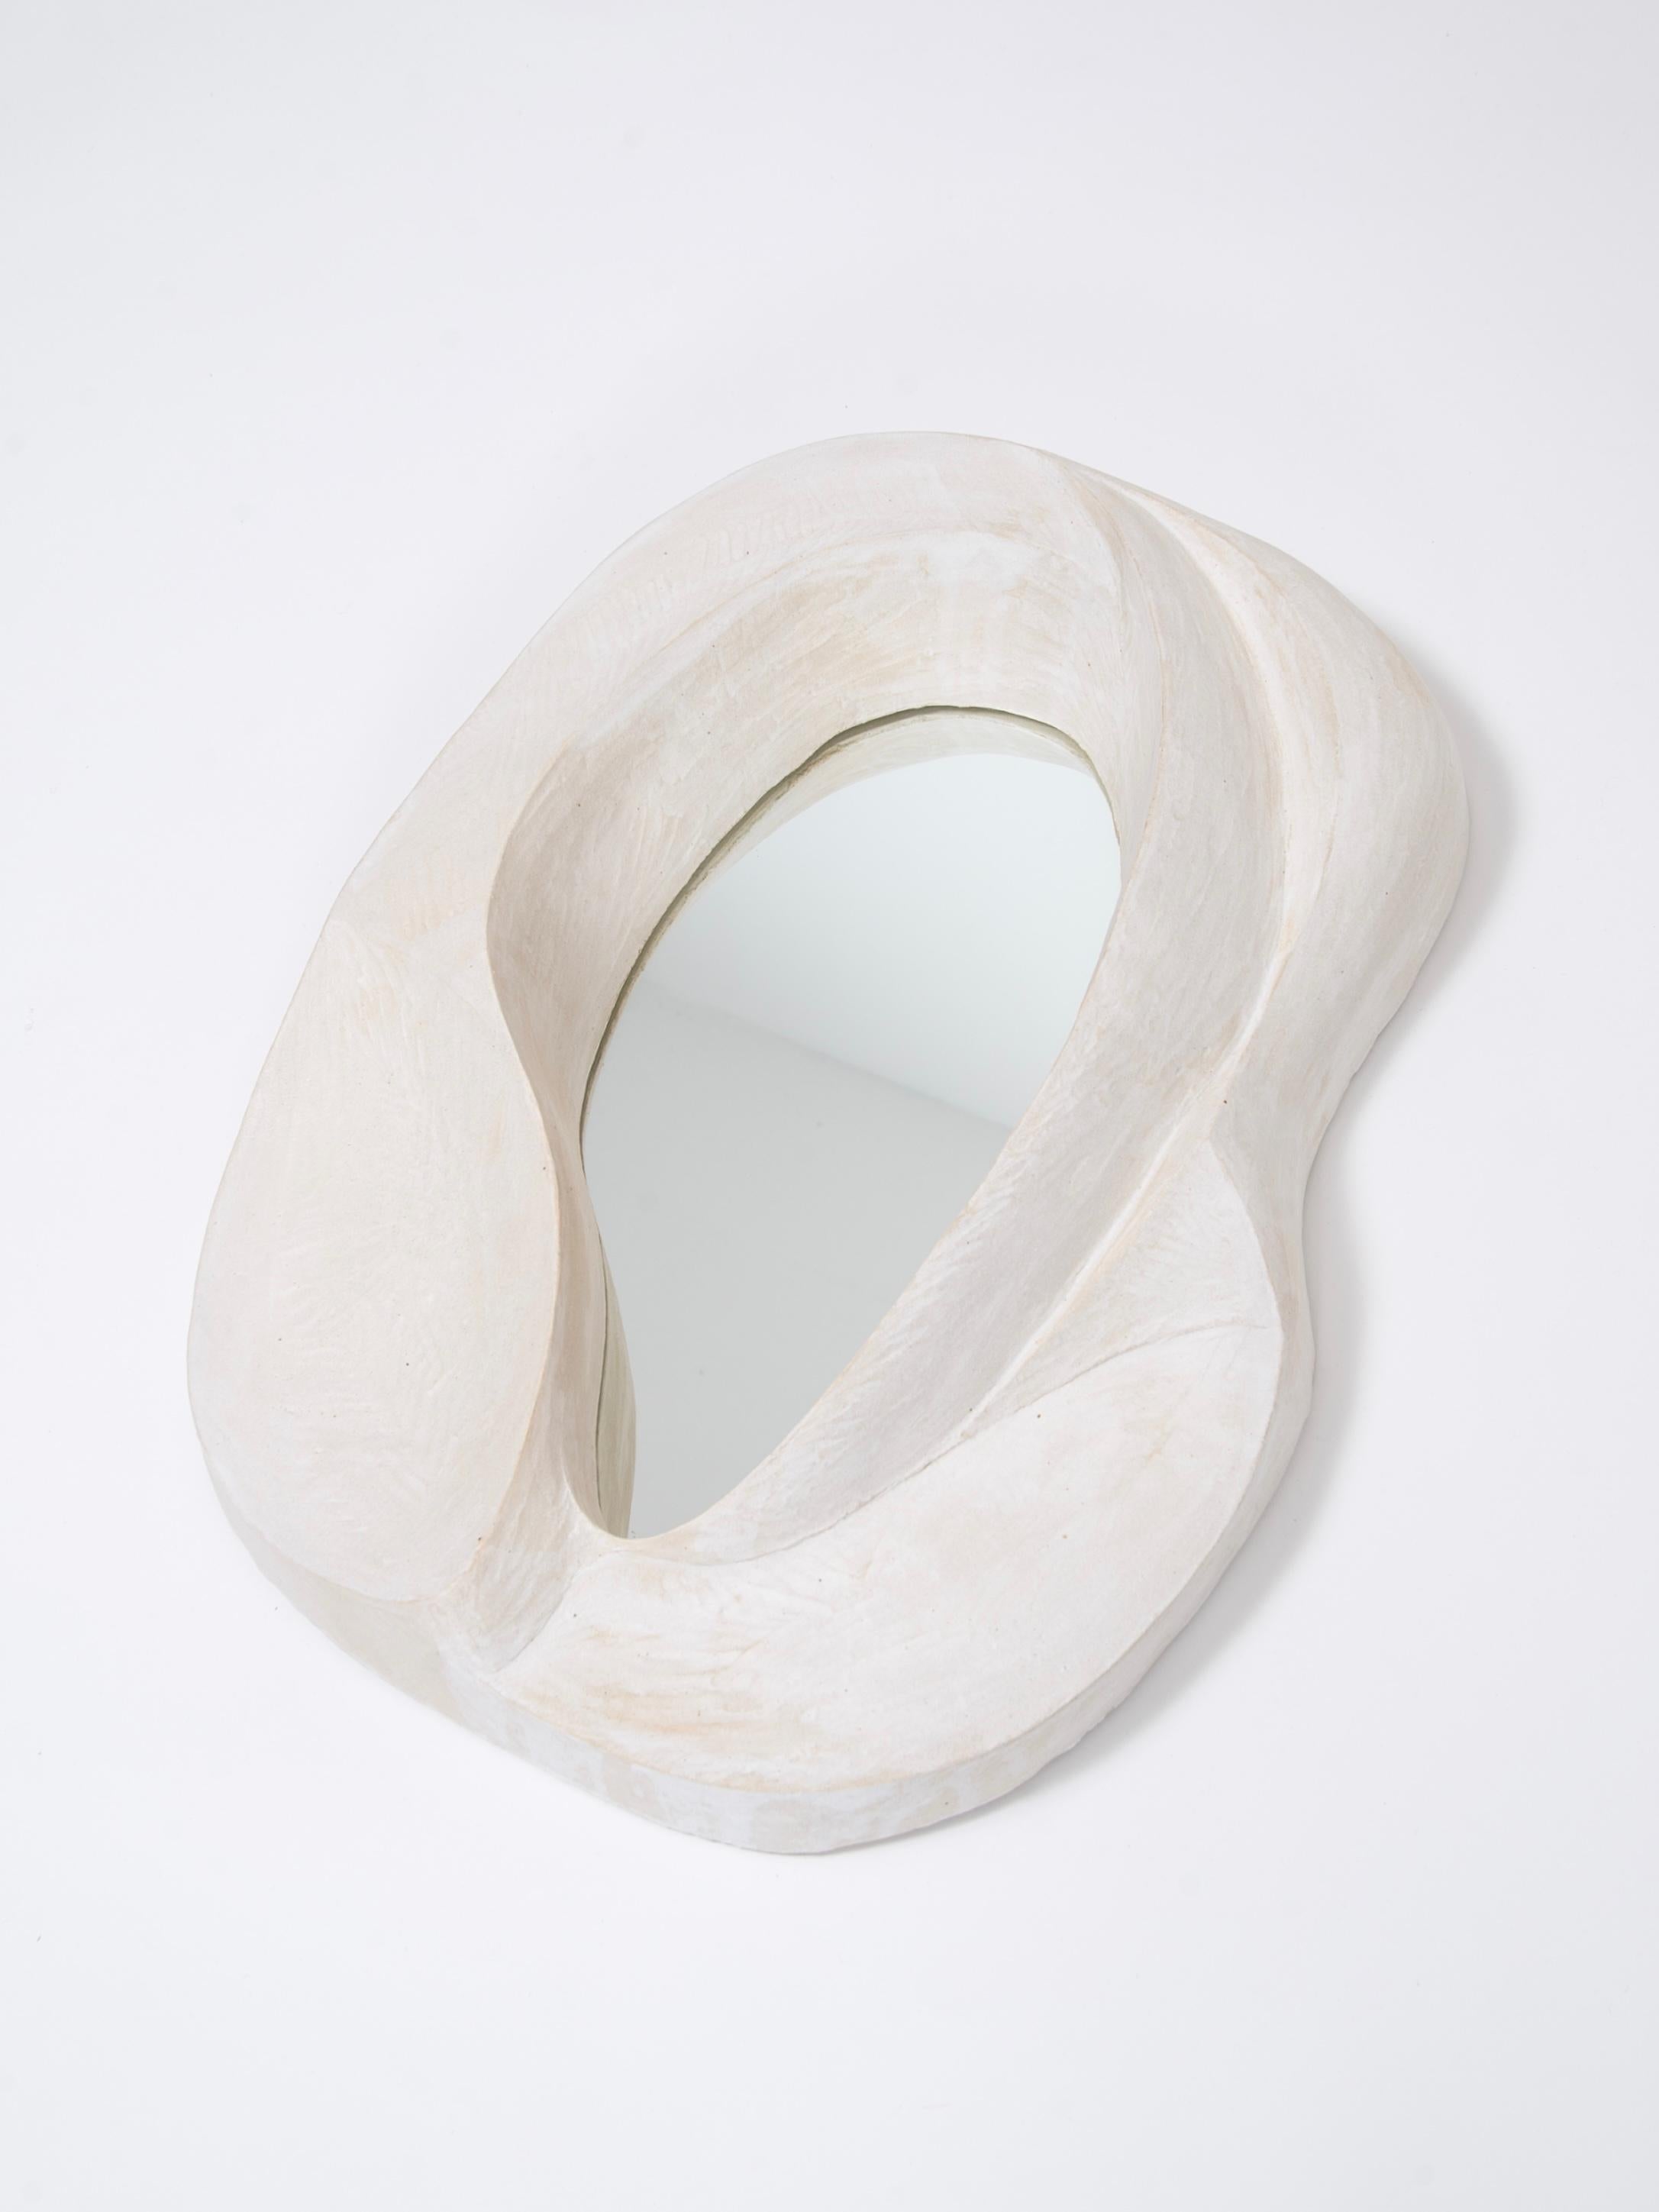 Faille Mirror by Natasha Dakhli
Material: Stoneware, white enamel
Dimensions: H 61 x 44 x 13 cm
Year: 2023

The carved mirror is  part of a small wall sculpture series. It was created around Natasha Dakhli’s inspiration of primitive architectures,